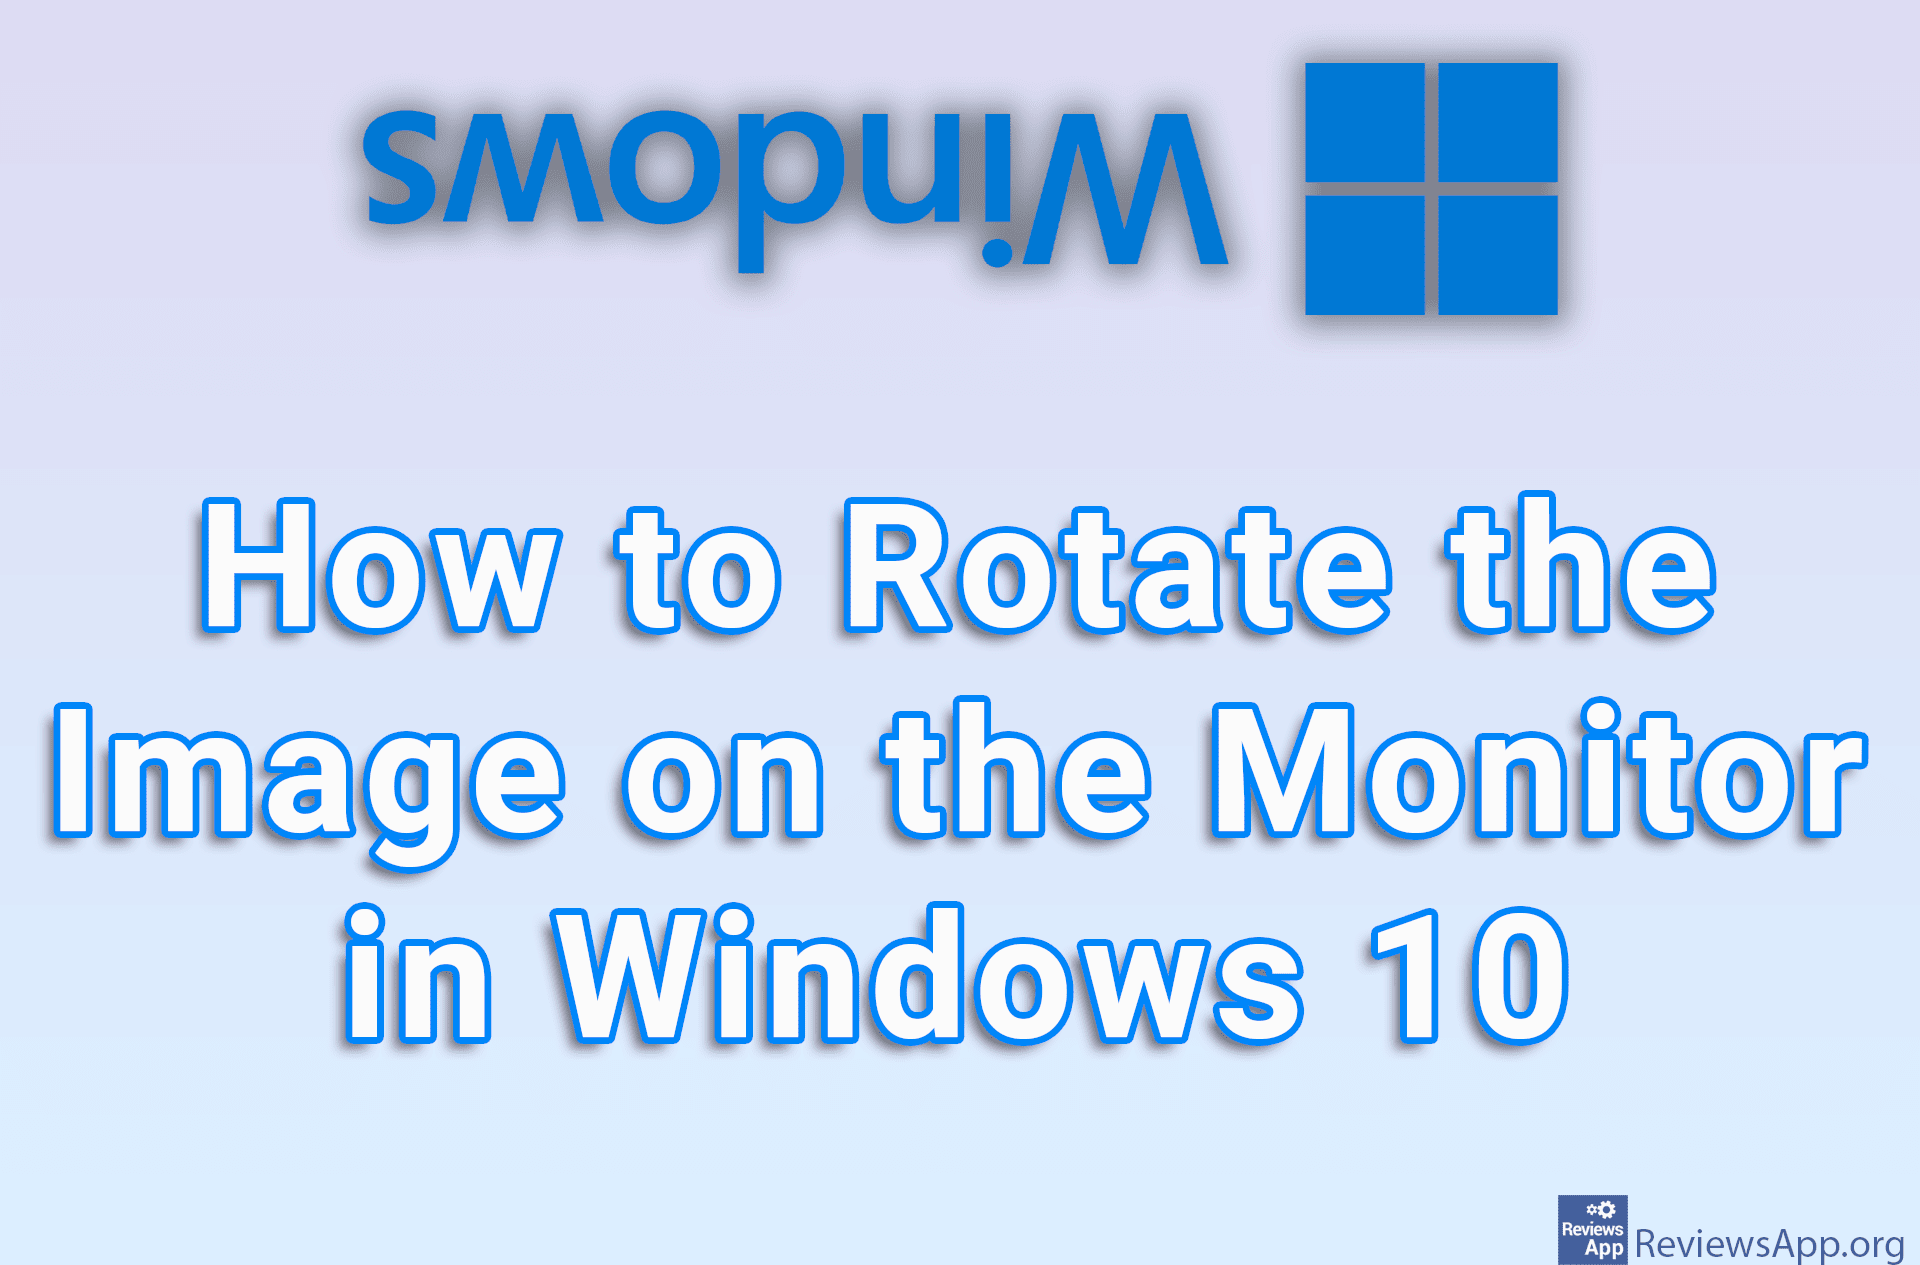 How to Rotate the Image on the Monitor in Windows 10